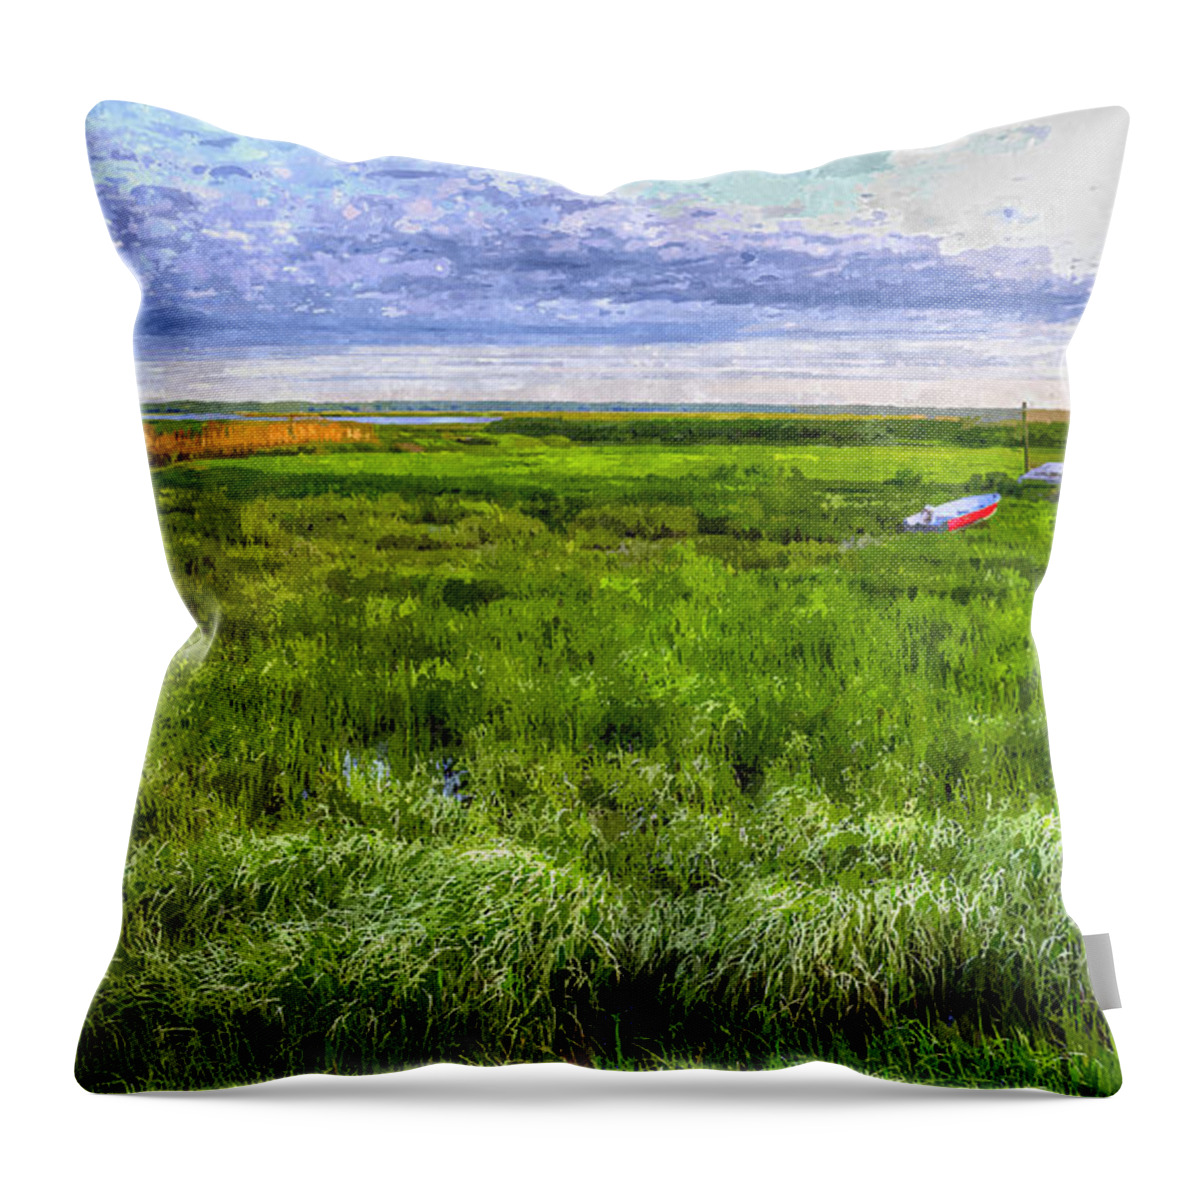 Salt Throw Pillow featuring the painting Ocean Marsh by Rick Mosher